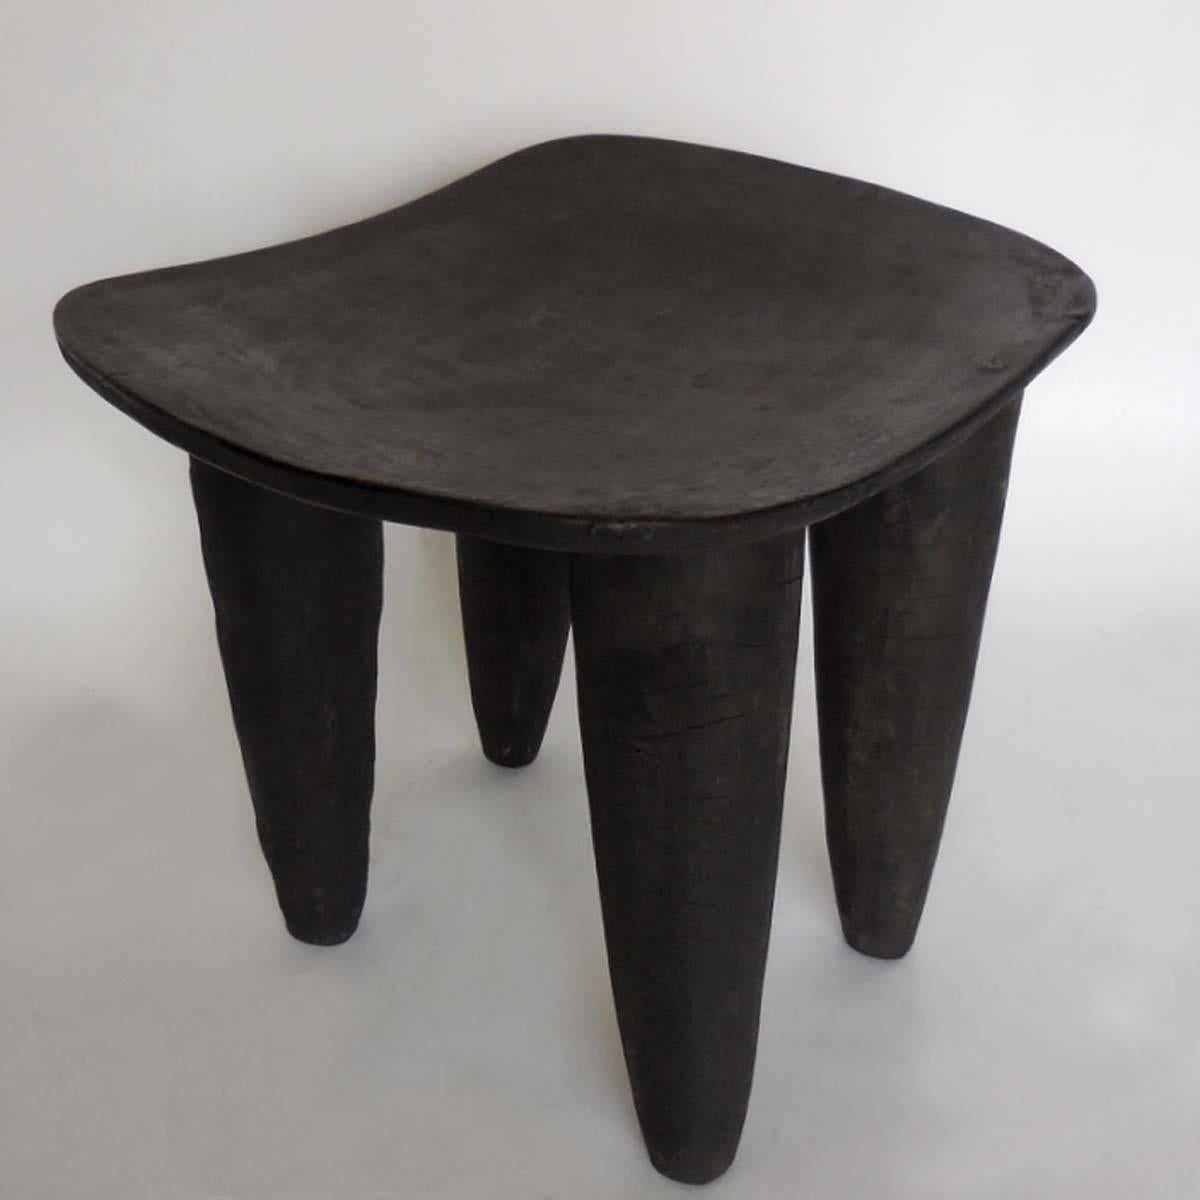 Antique African Senufo tribe stool, carved from one piece of wood. Great old, natural black patina. Great little stool or side table. From Mali.

